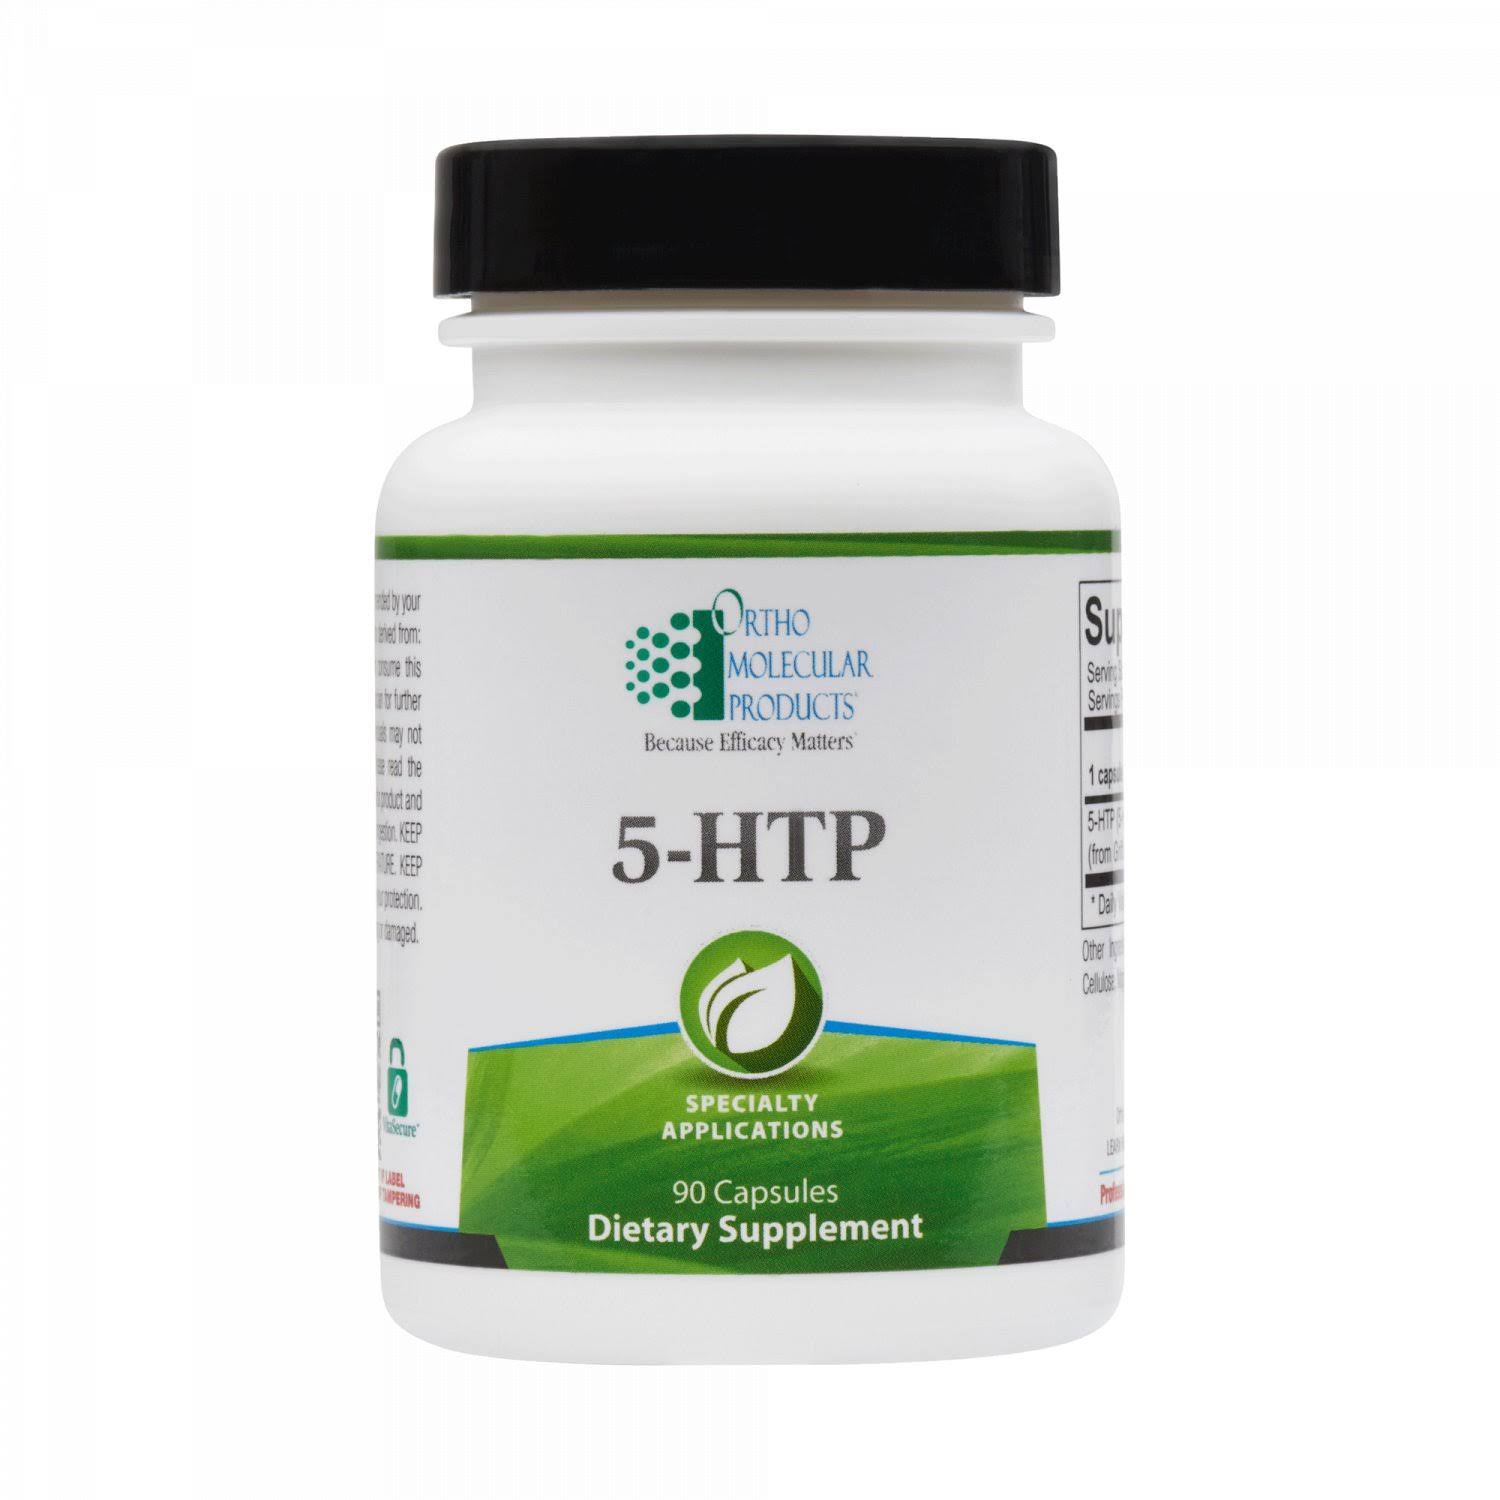 Ortho Molecular Product 5-Htp Dietary Supplement - 100mg, 90ct